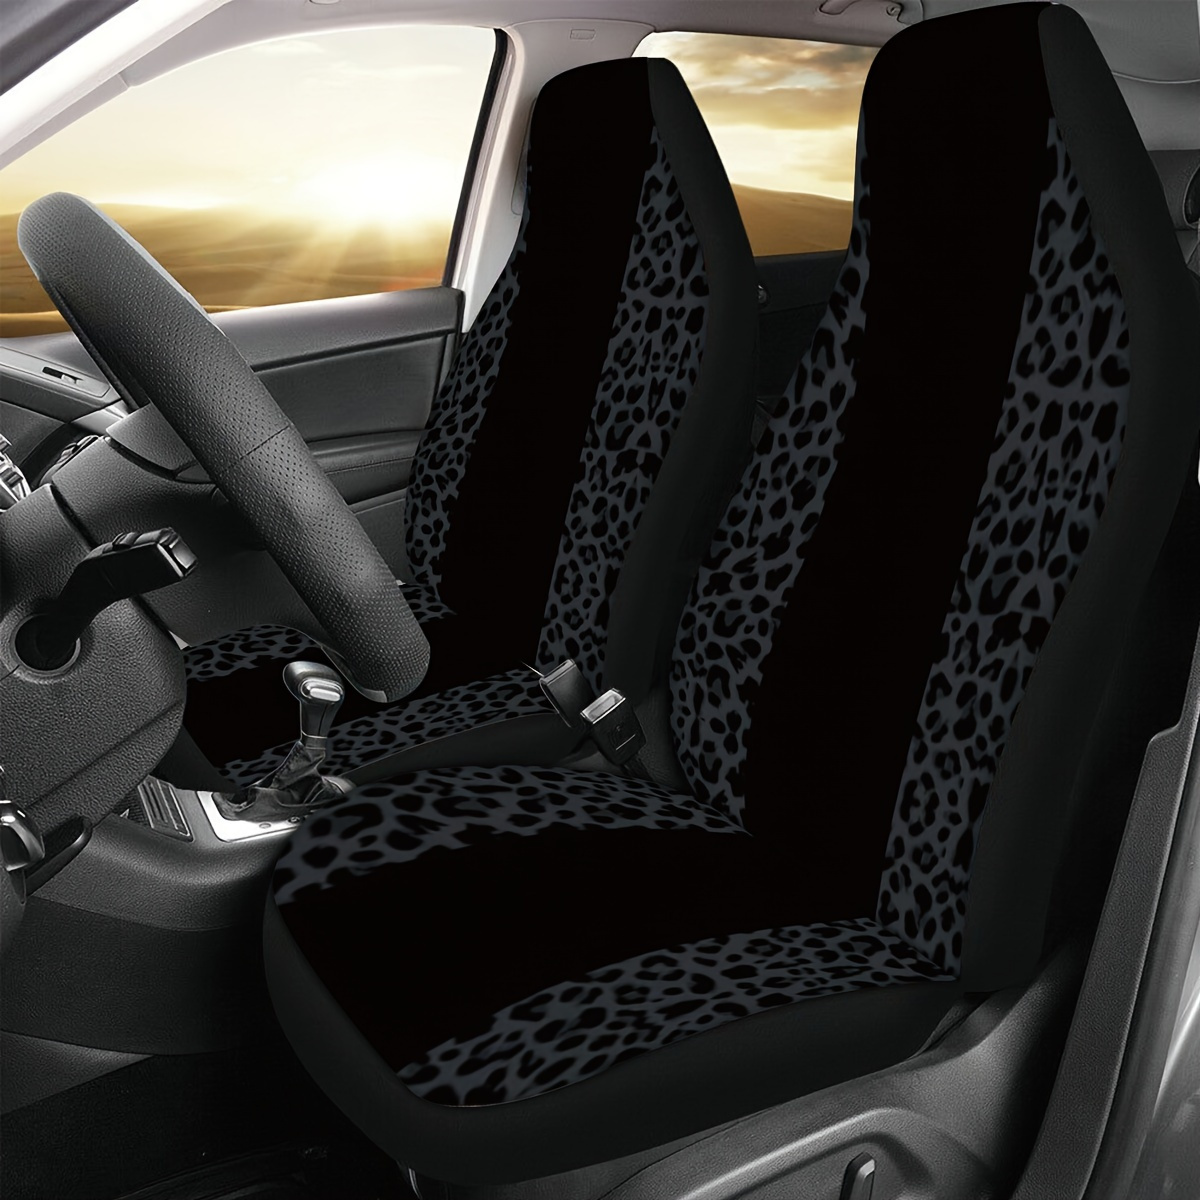 

1pc Universal Polyester Car Seat Cover - Leopard Print, Easy Installation, Fashionable Soft-touch, Durable, Universal Fit Vehicle Seat Protector